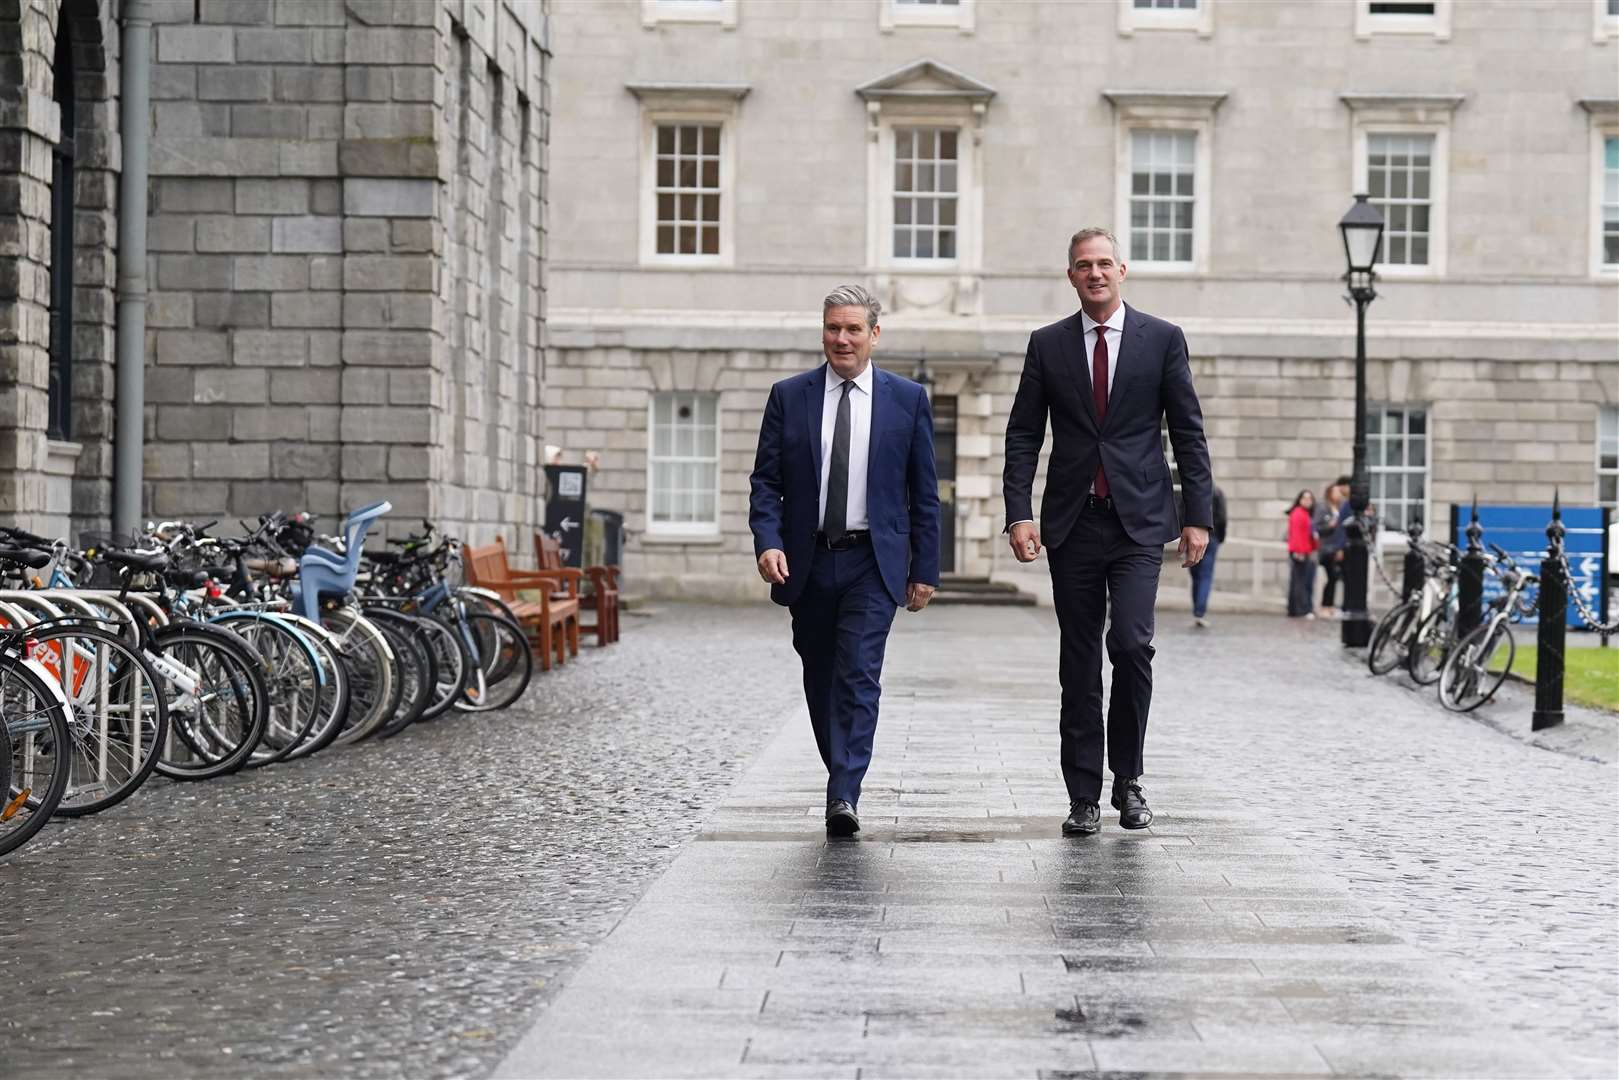 Sir Keir Starmer arriving with shadow Northern Ireland secretary Peter Kyle to Trinity College Dublin during his visit to Dublin (Stefan Rousseau/PA)